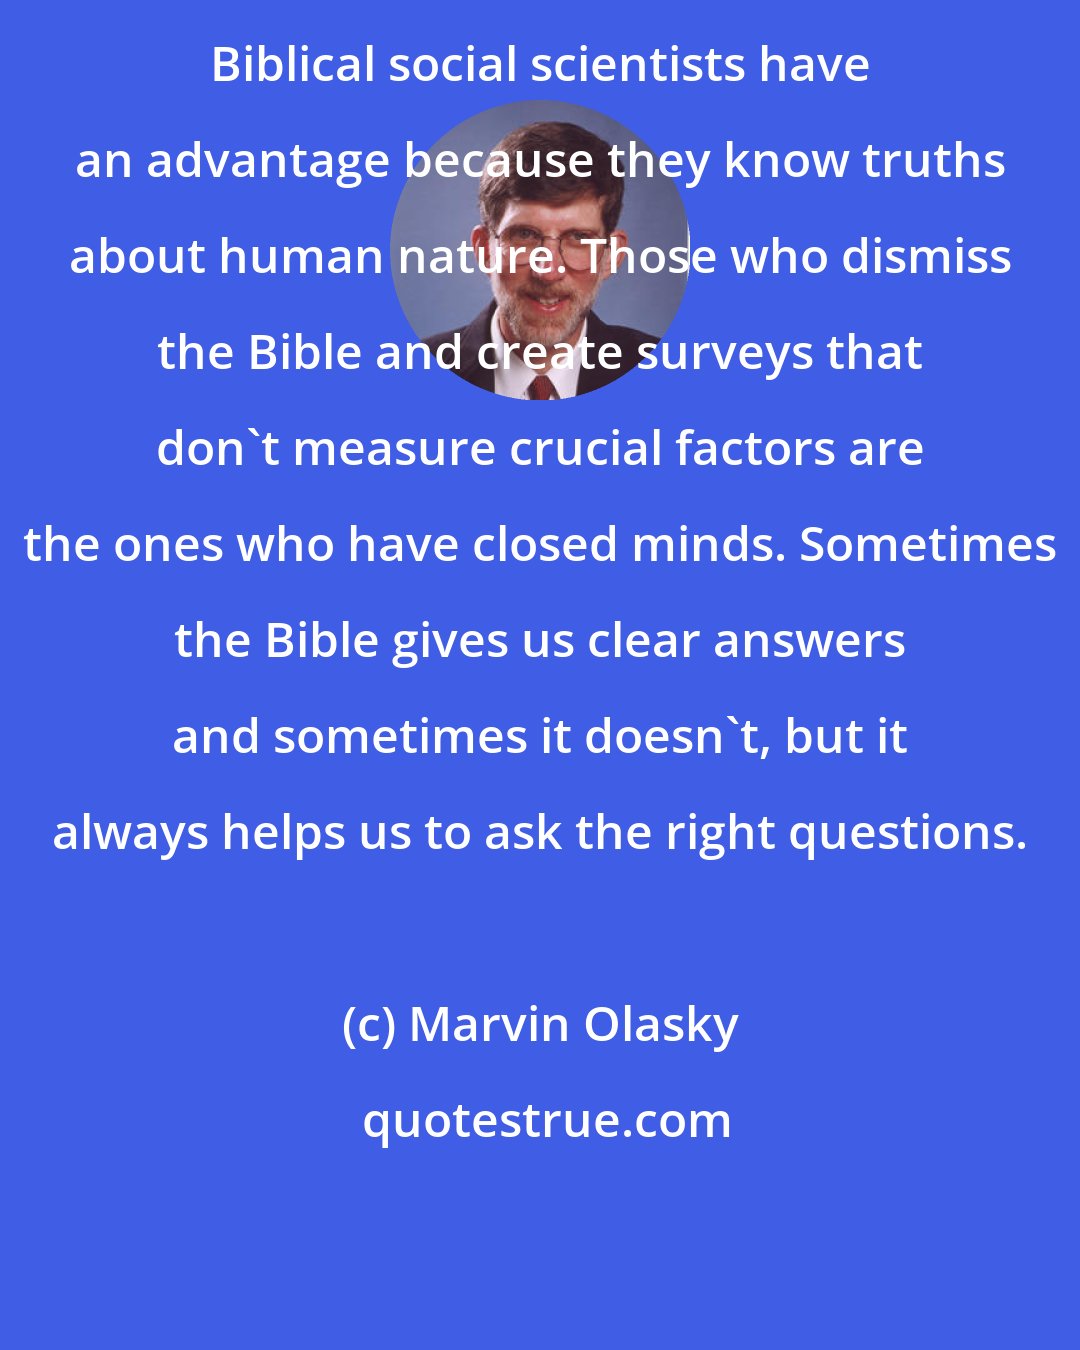 Marvin Olasky: Biblical social scientists have an advantage because they know truths about human nature. Those who dismiss the Bible and create surveys that don't measure crucial factors are the ones who have closed minds. Sometimes the Bible gives us clear answers and sometimes it doesn't, but it always helps us to ask the right questions.